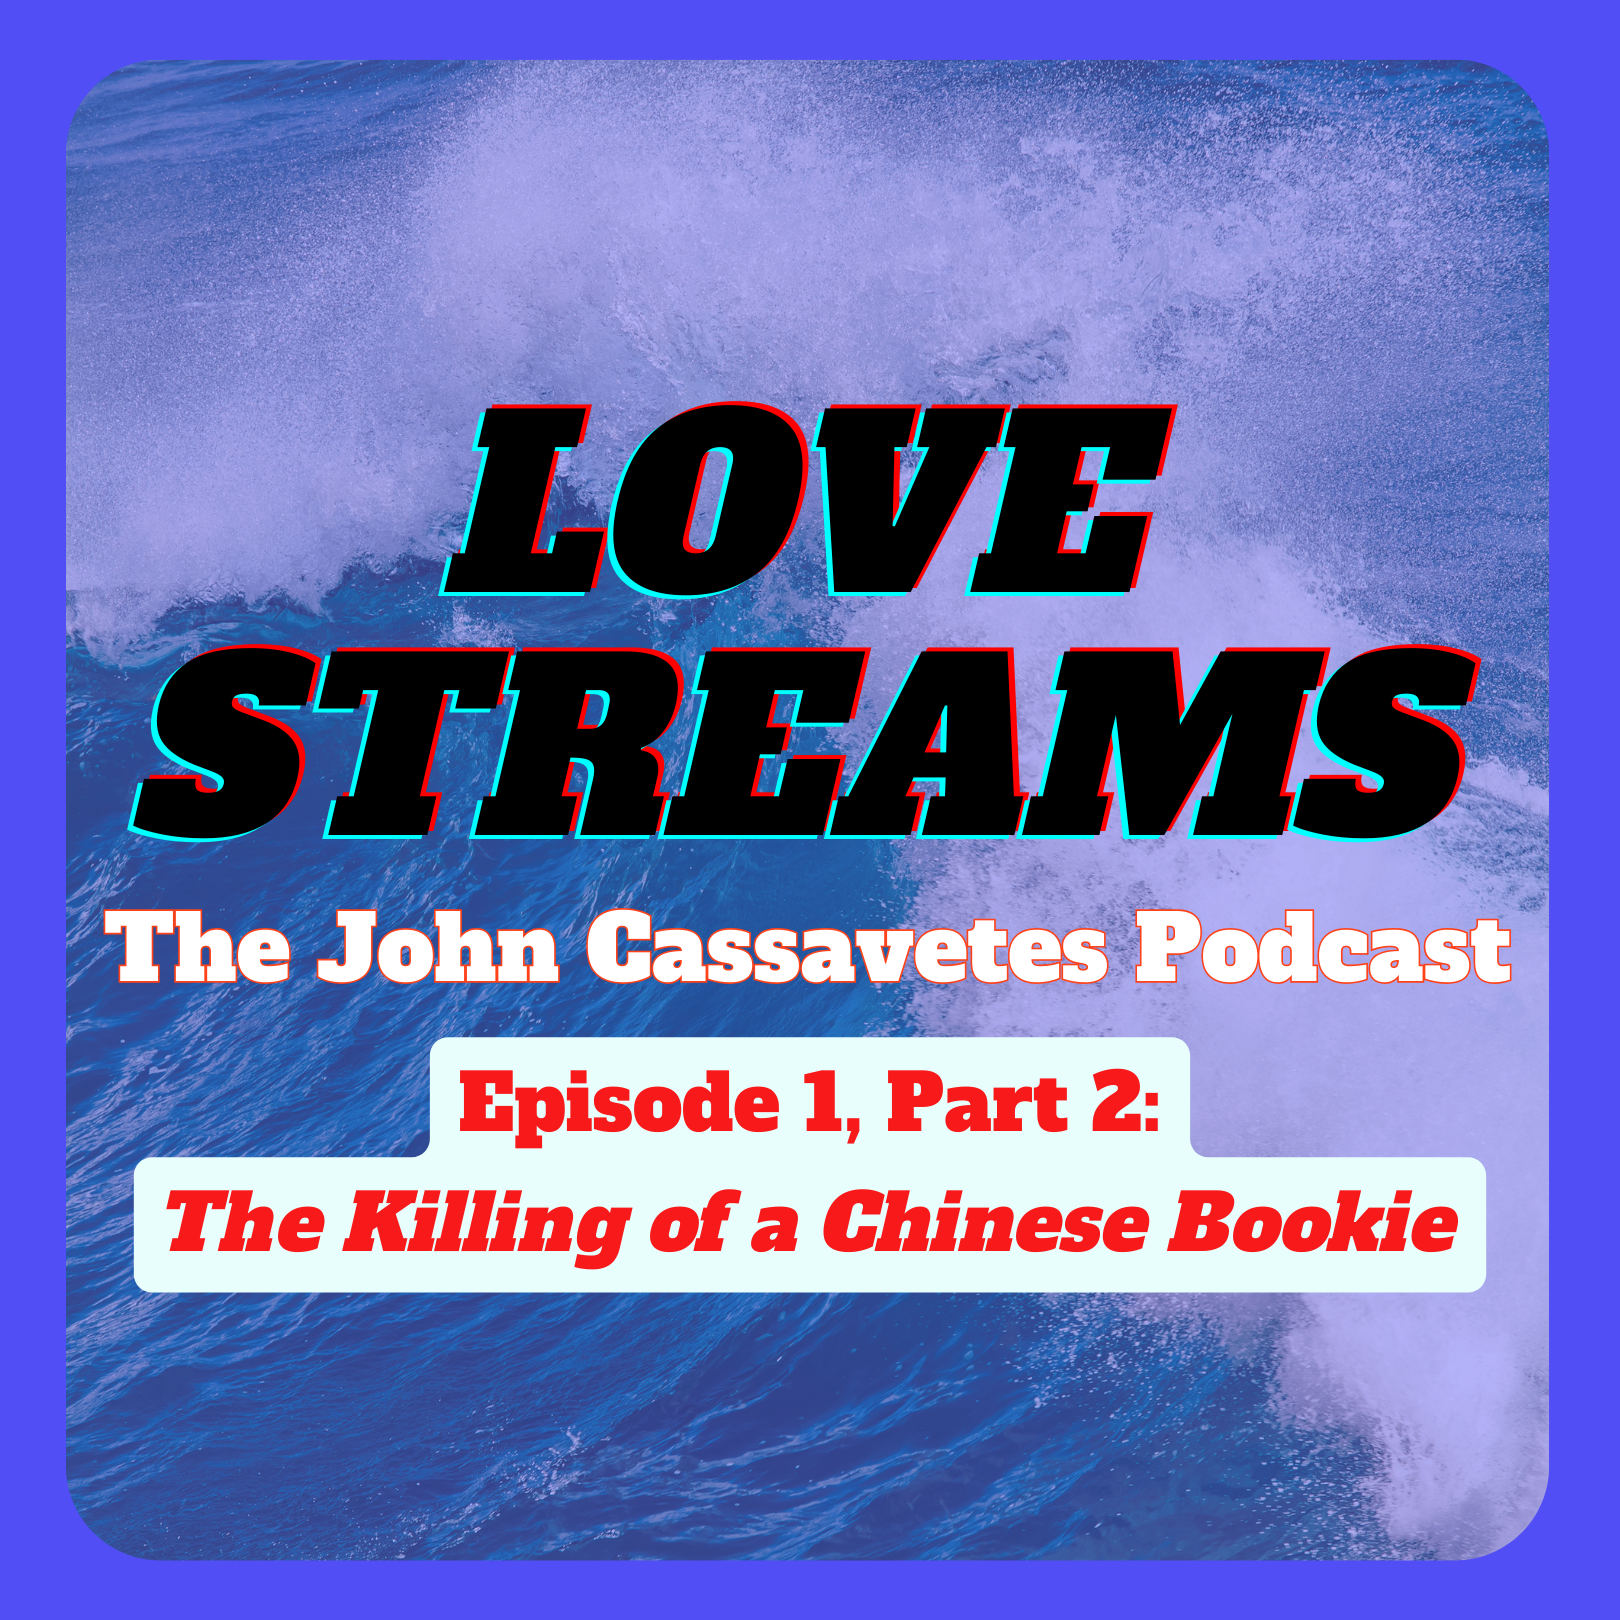 Episode 1, Part 2: The Killing of a Chinese Bookie